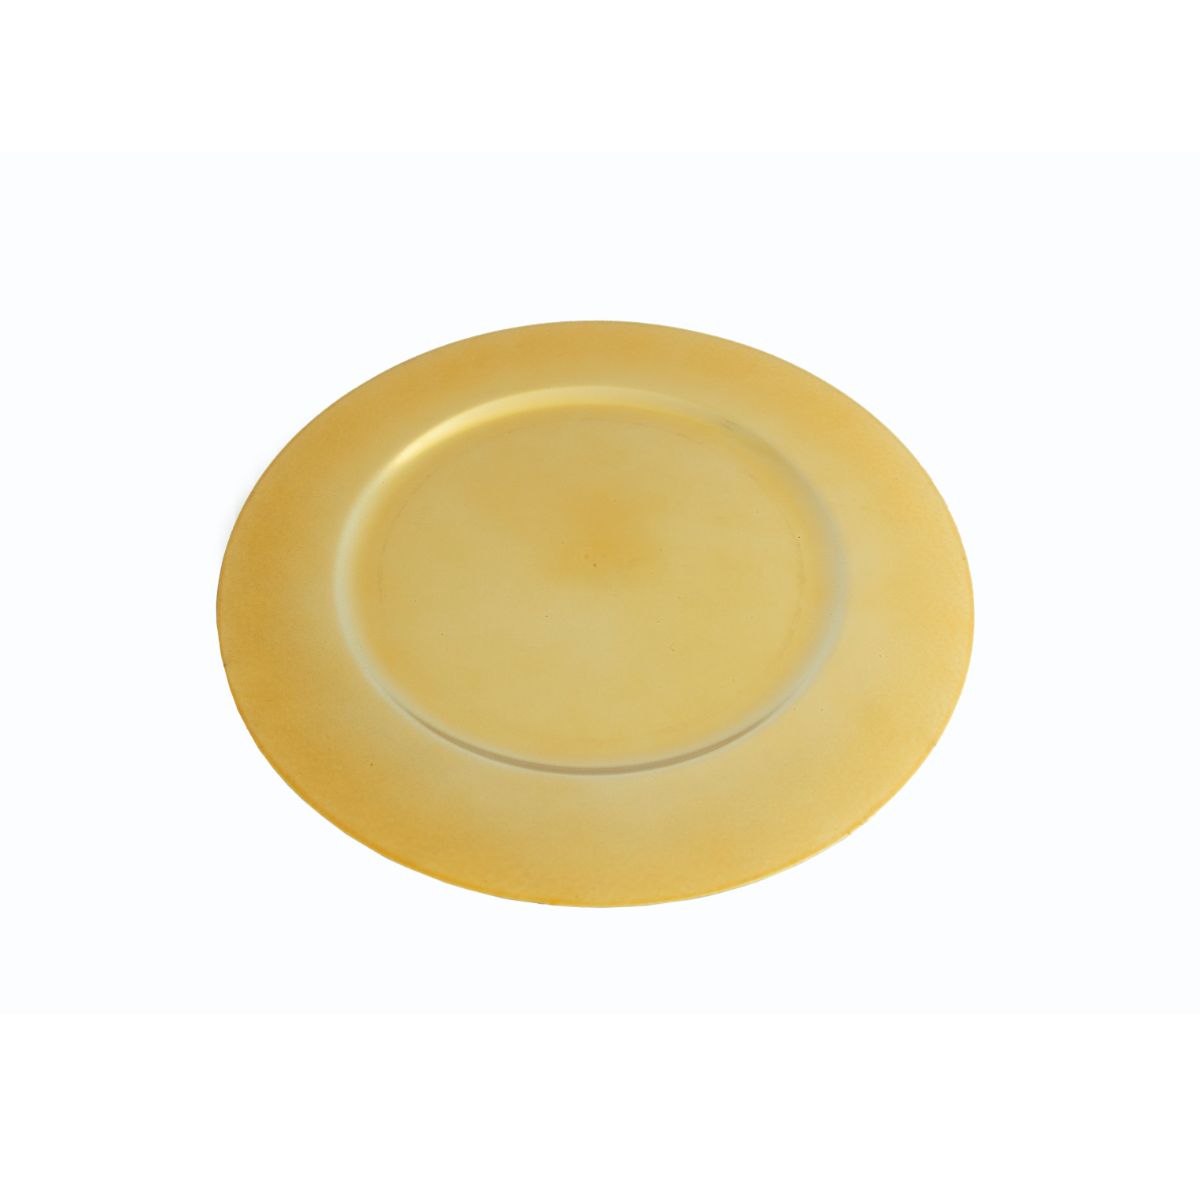  Gold Charger Plate 